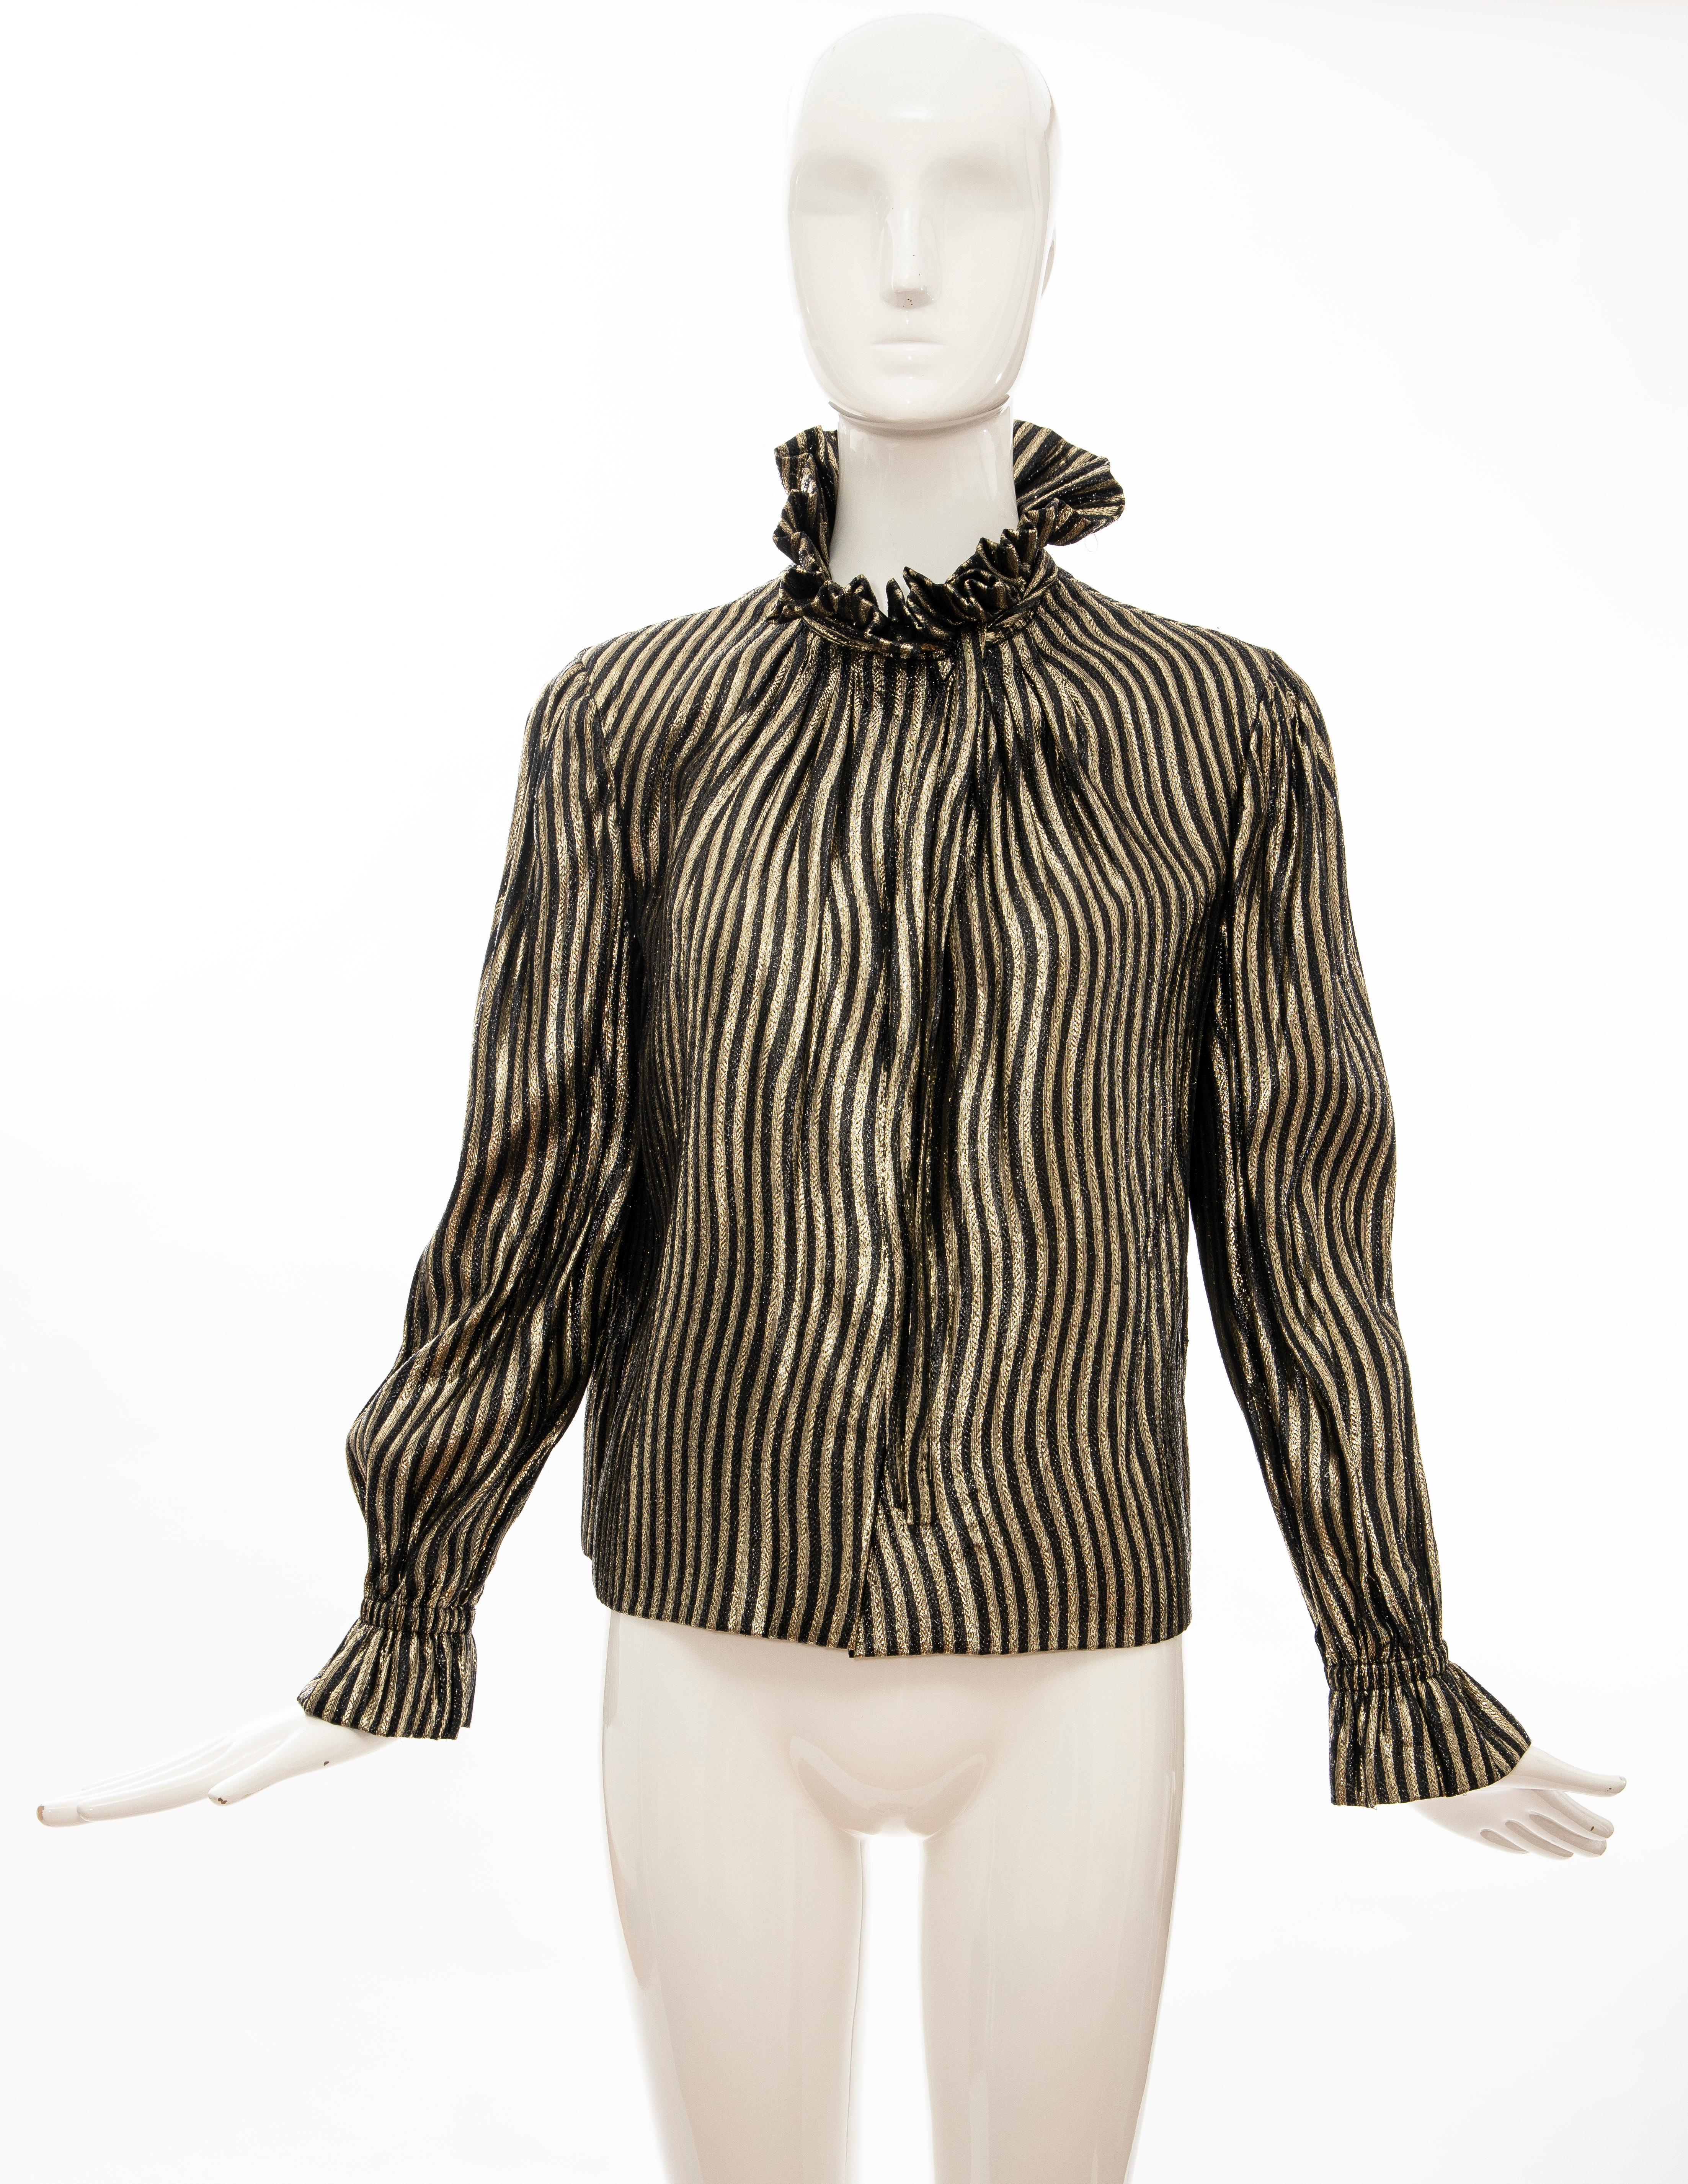 Pauline Trigere, circa 1970's black gold striped metallic snap front blouse.

No Size Label

Bust: 36, Sleeve: 24, Shoulder: 16, Length: 23